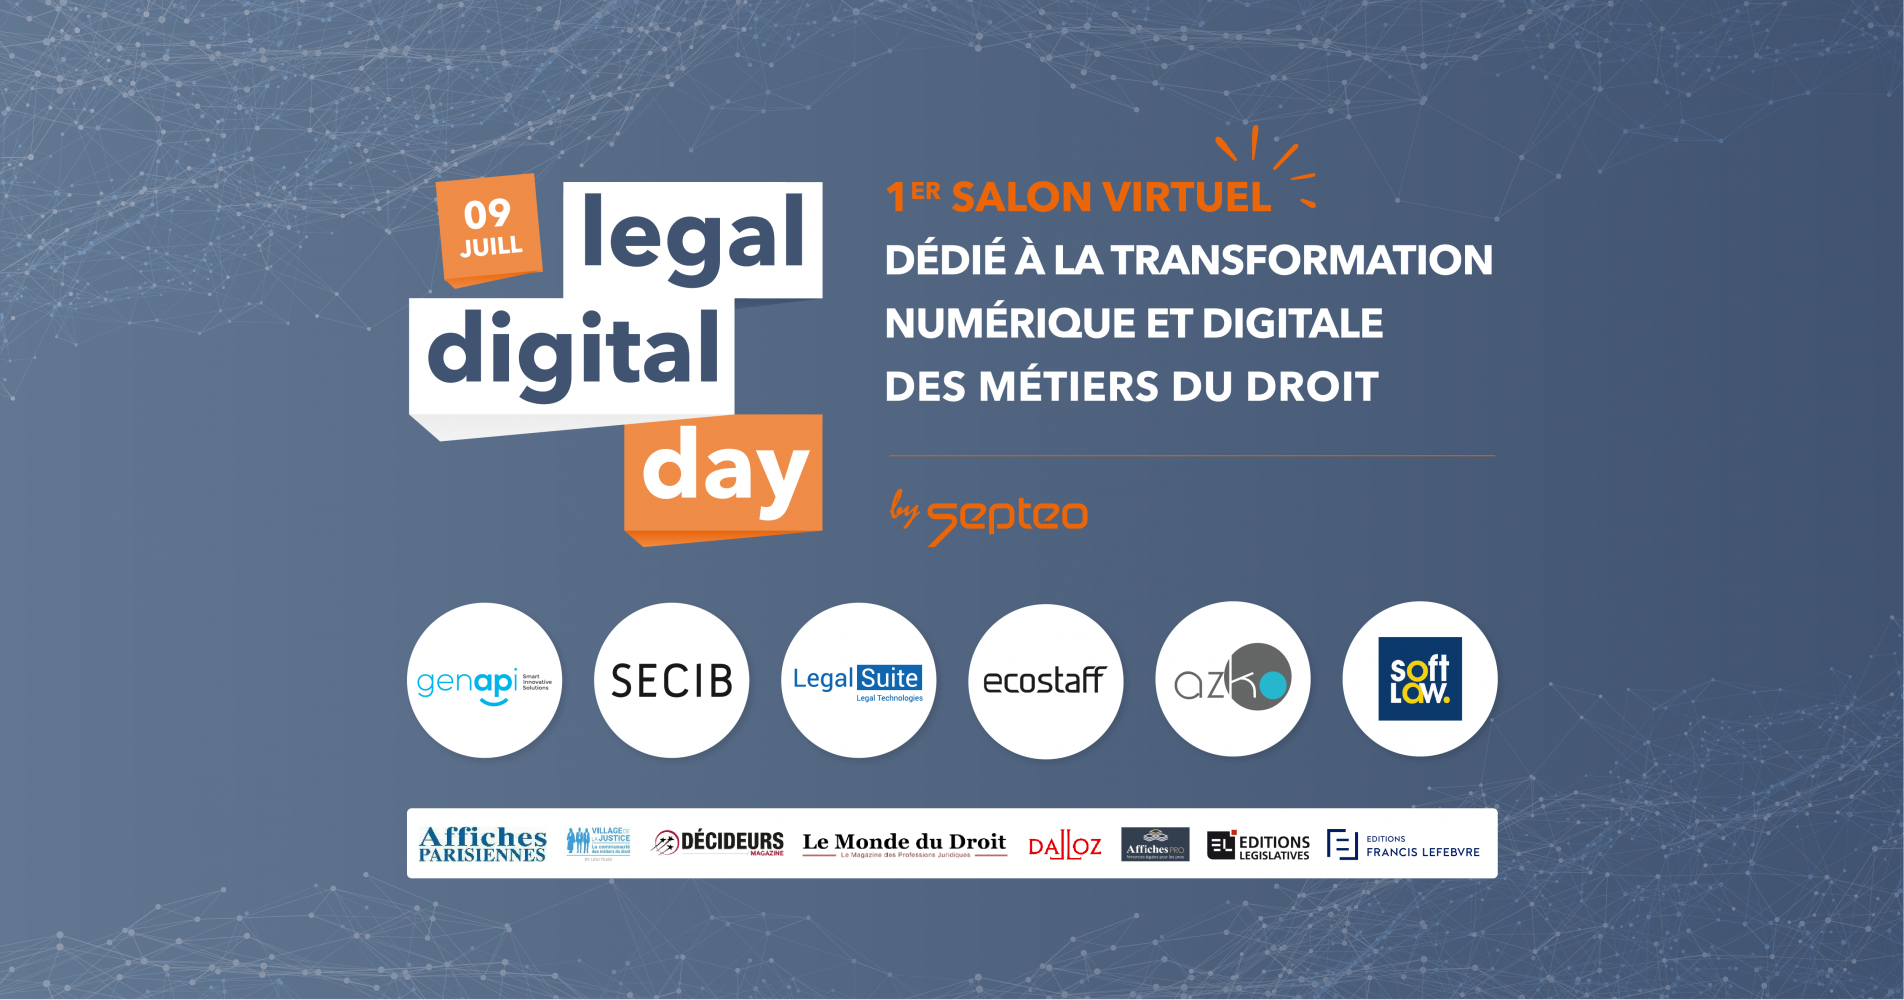 Evènement : LEGAL DIGITAL DAY by Septeo 